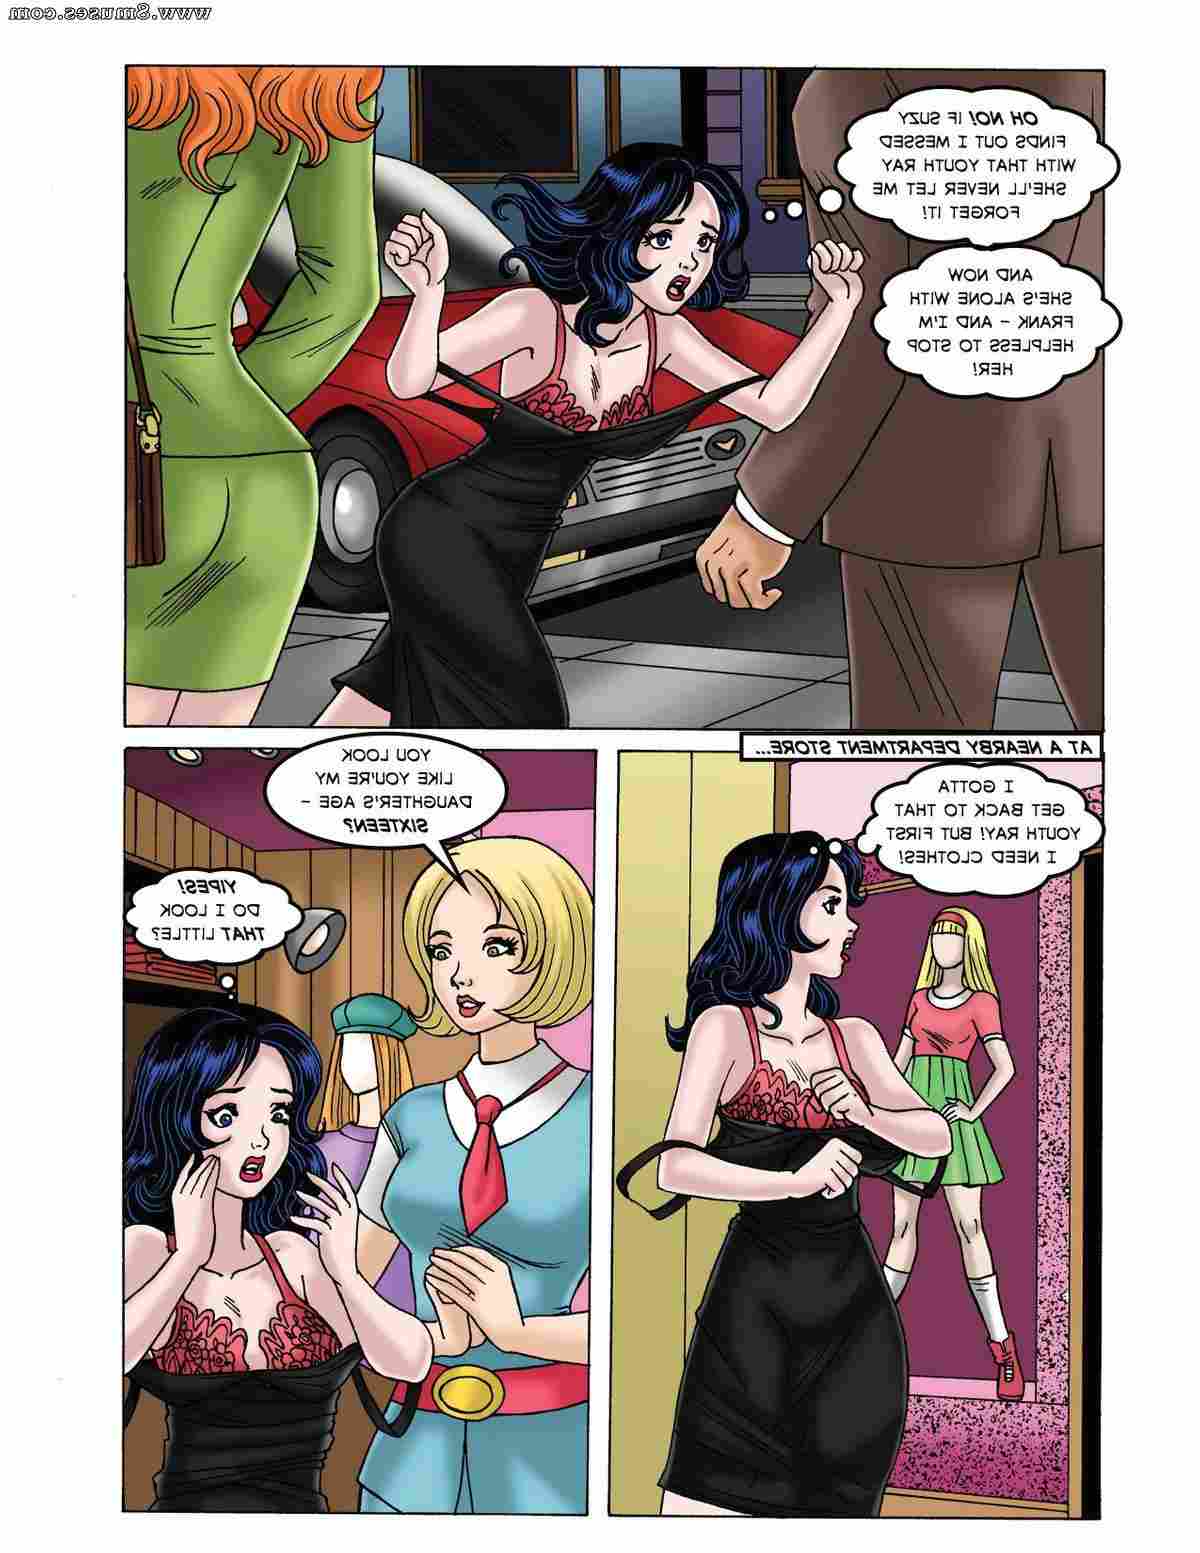 DreamTales-Comics/Crybaby-Marilyn Crybaby_Marilyn__8muses_-_Sex_and_Porn_Comics_11.jpg